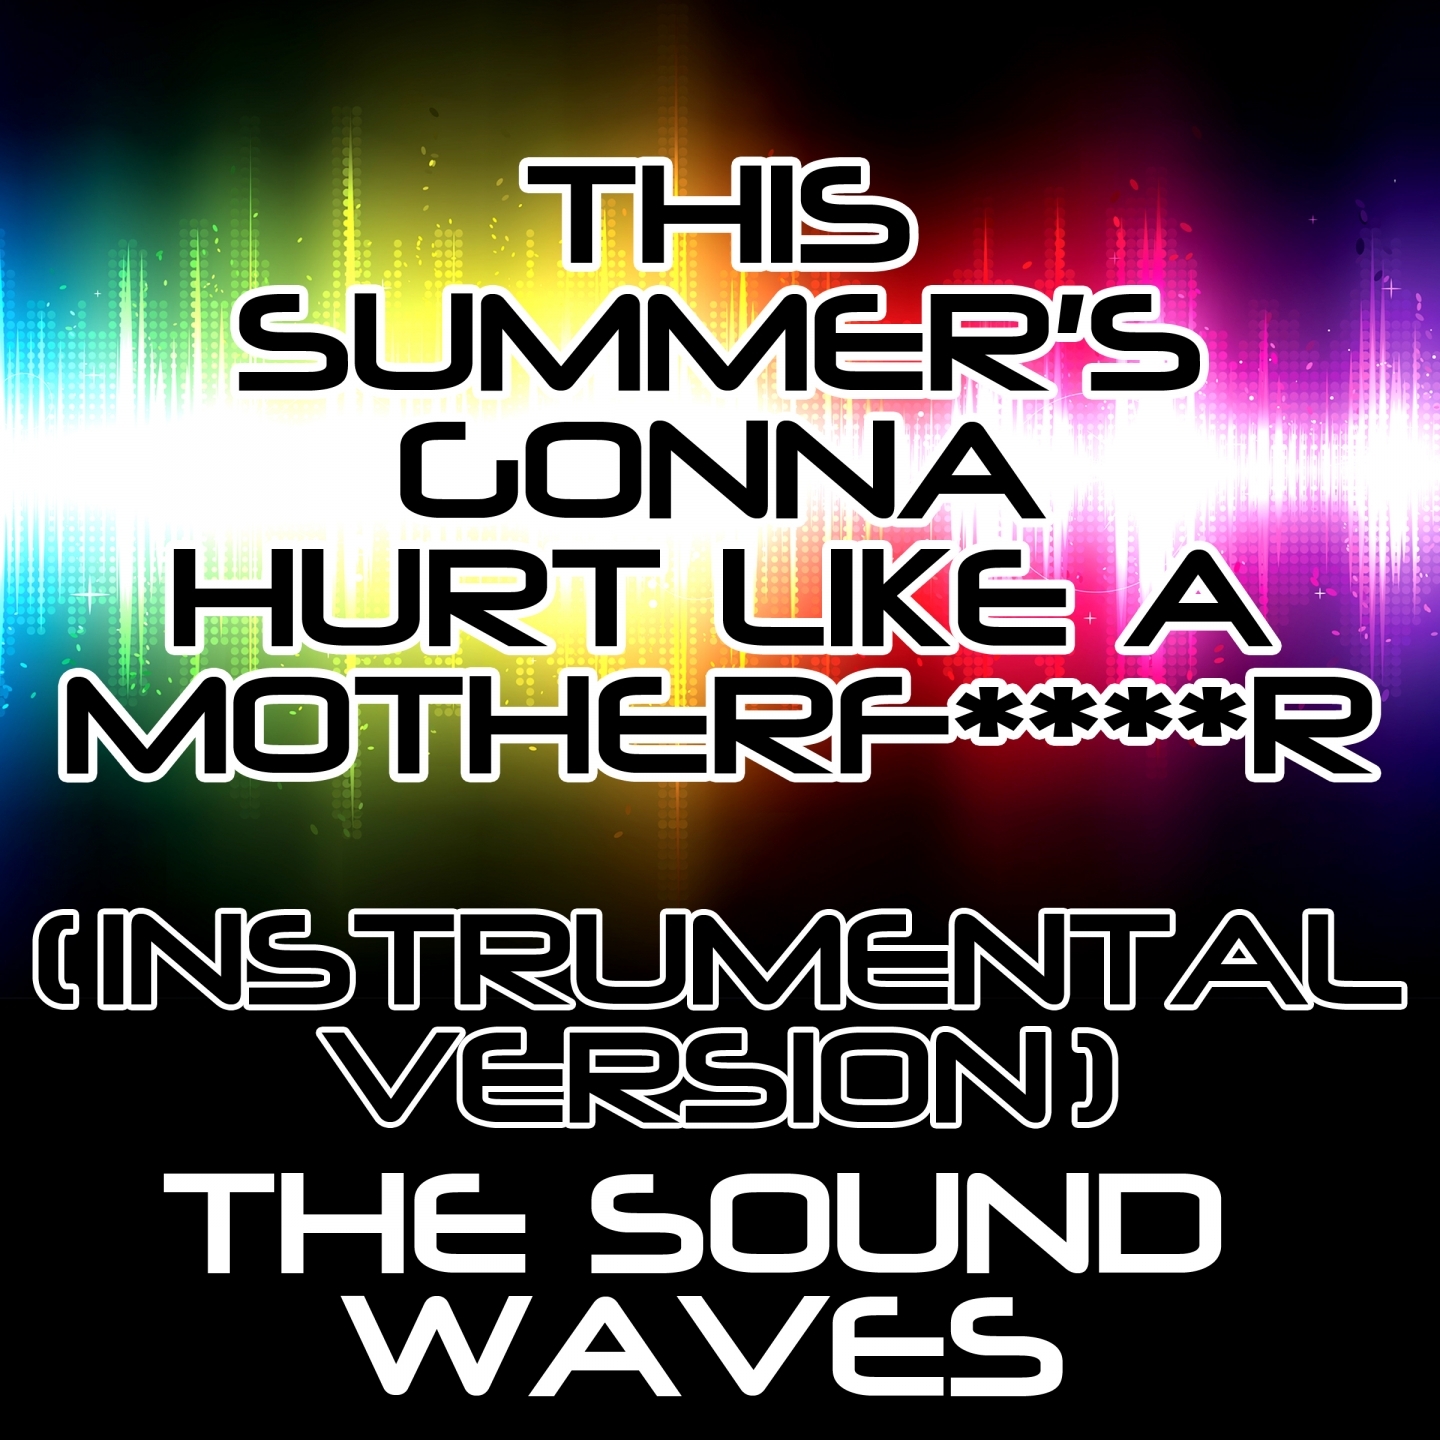 This Summer's Gonna Hurt Like a ************ (Instrumental Version)